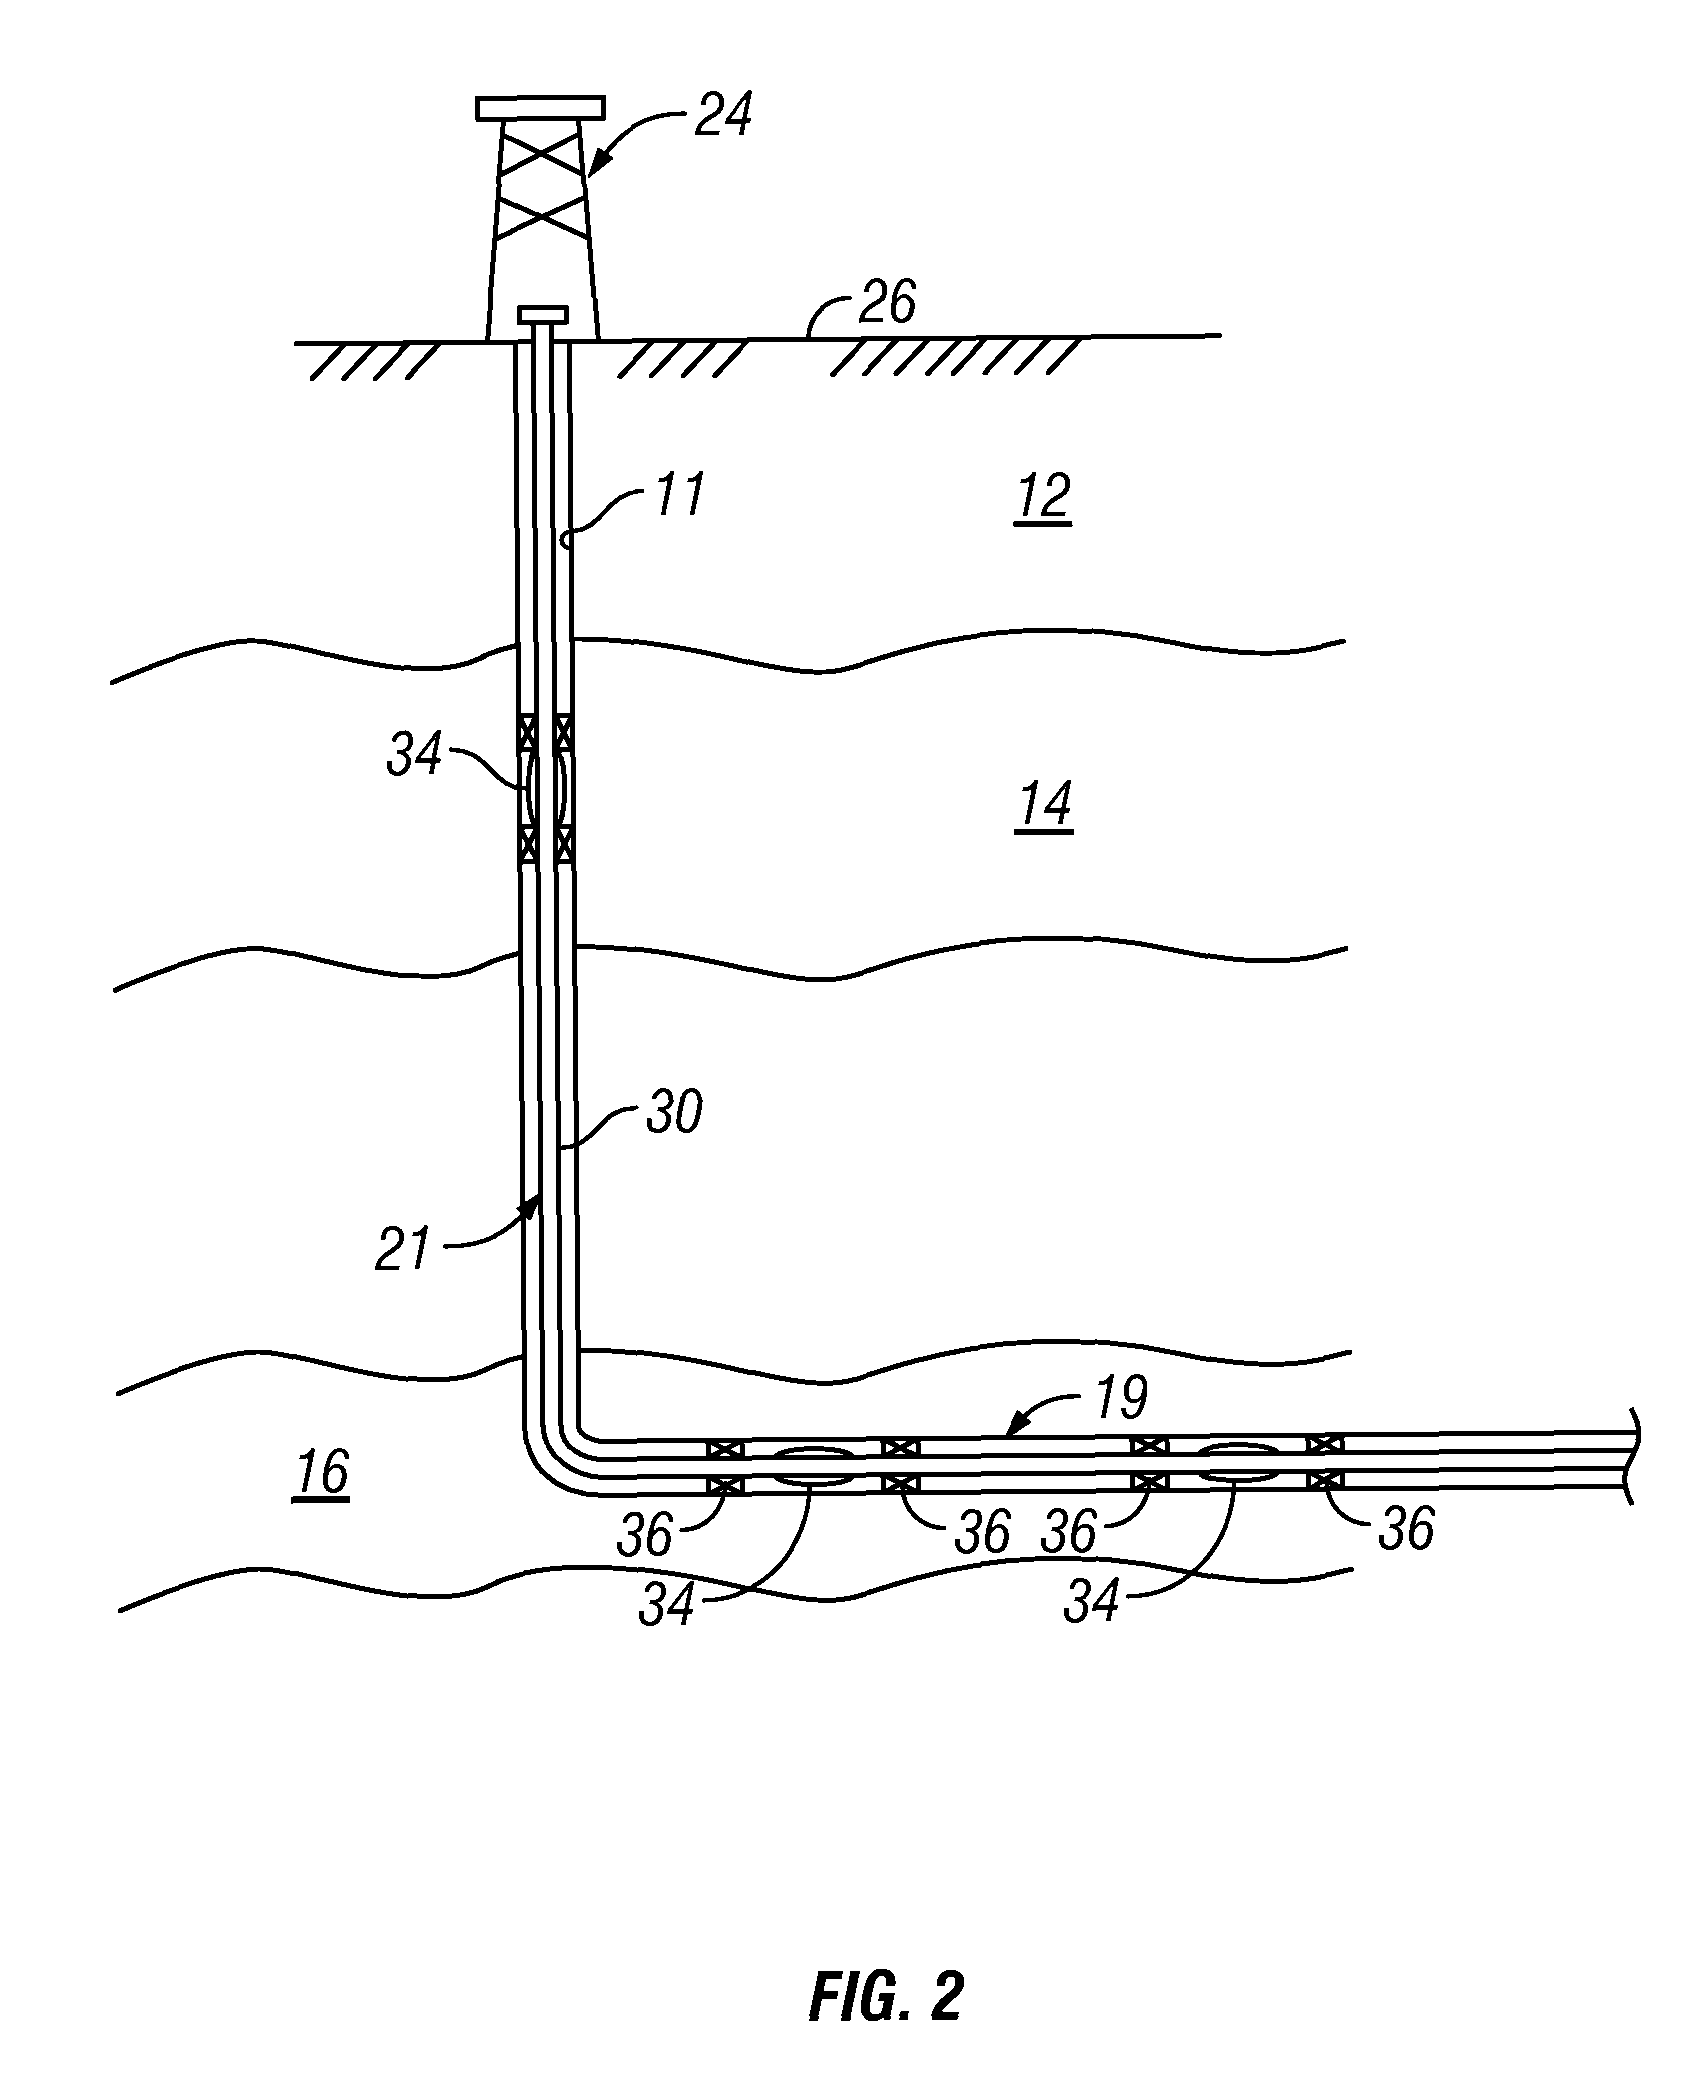 In-flow control device utilizing a water sensitive media